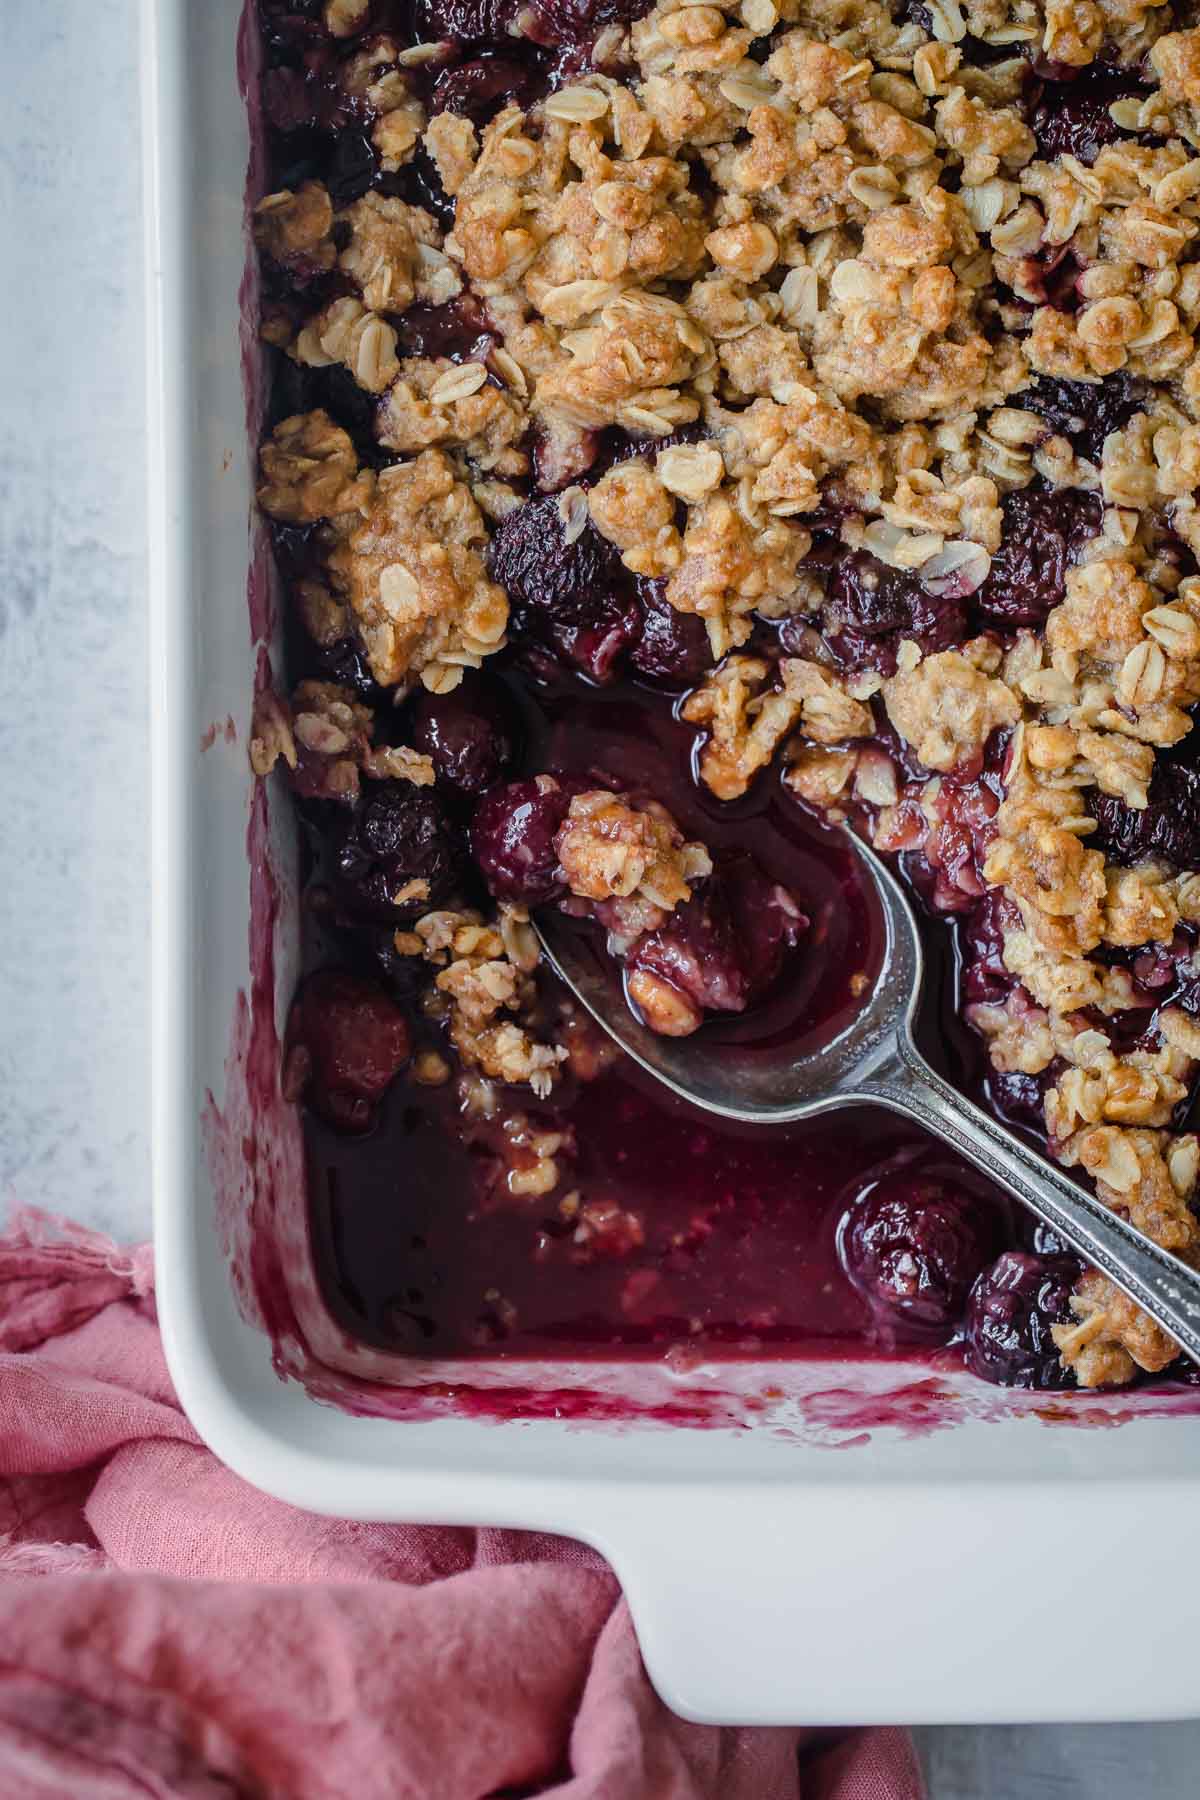 A fully baked Cherry crisp with crunchy topping.